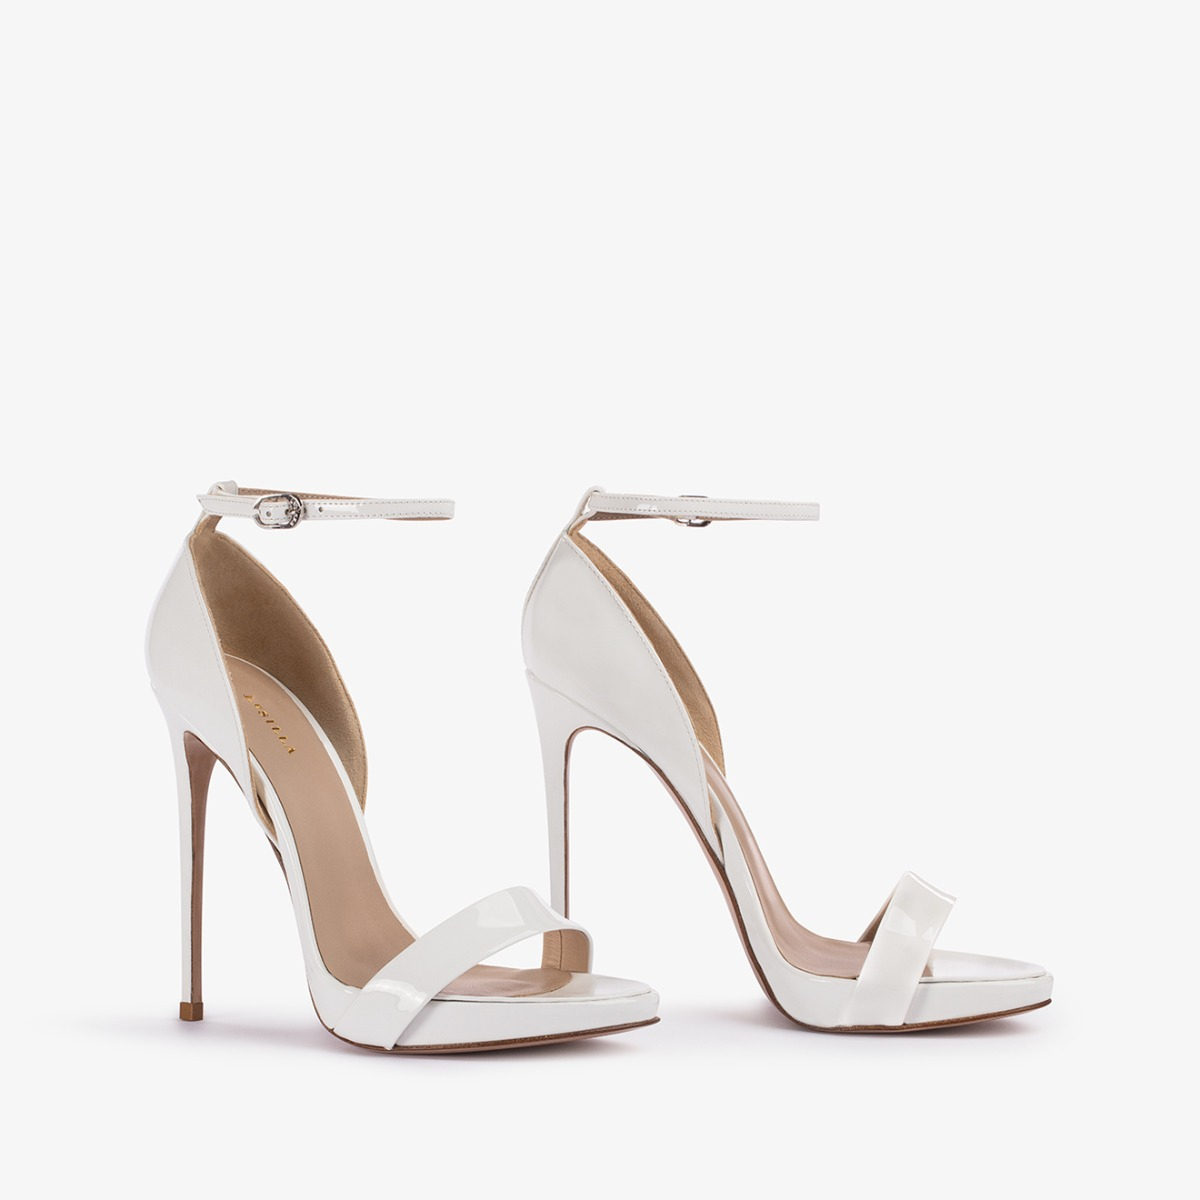 NAIKE SANDAL 110 mm - Le Silla official outlet